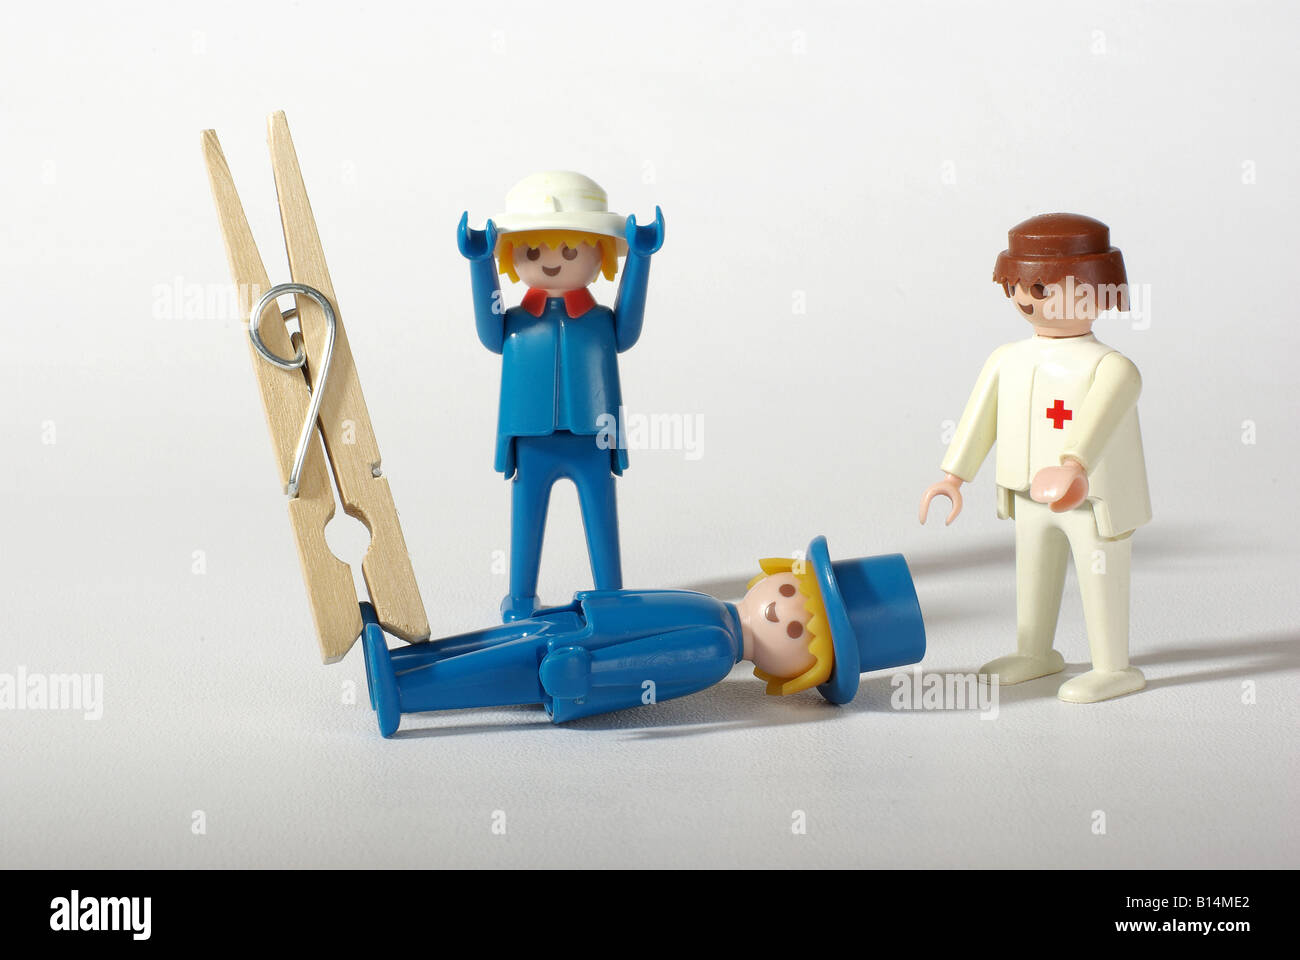 Nasty accident with Playmobil people Stock Photo